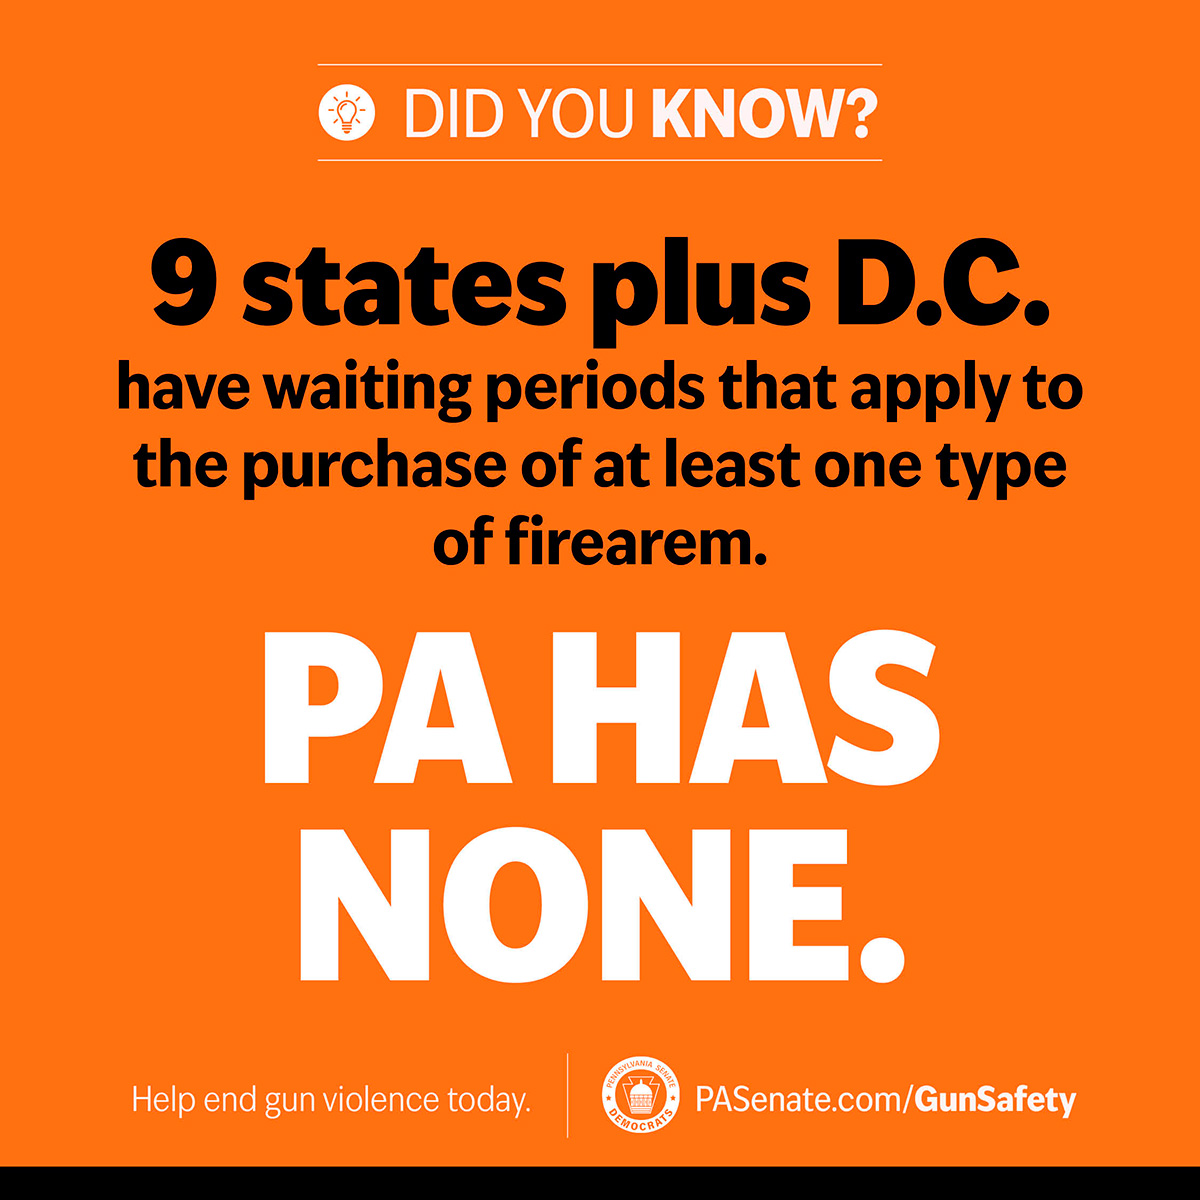 Did you know? 9 states plus D.C. have waiting periods that apply to the purchase of at least one type of firearm.